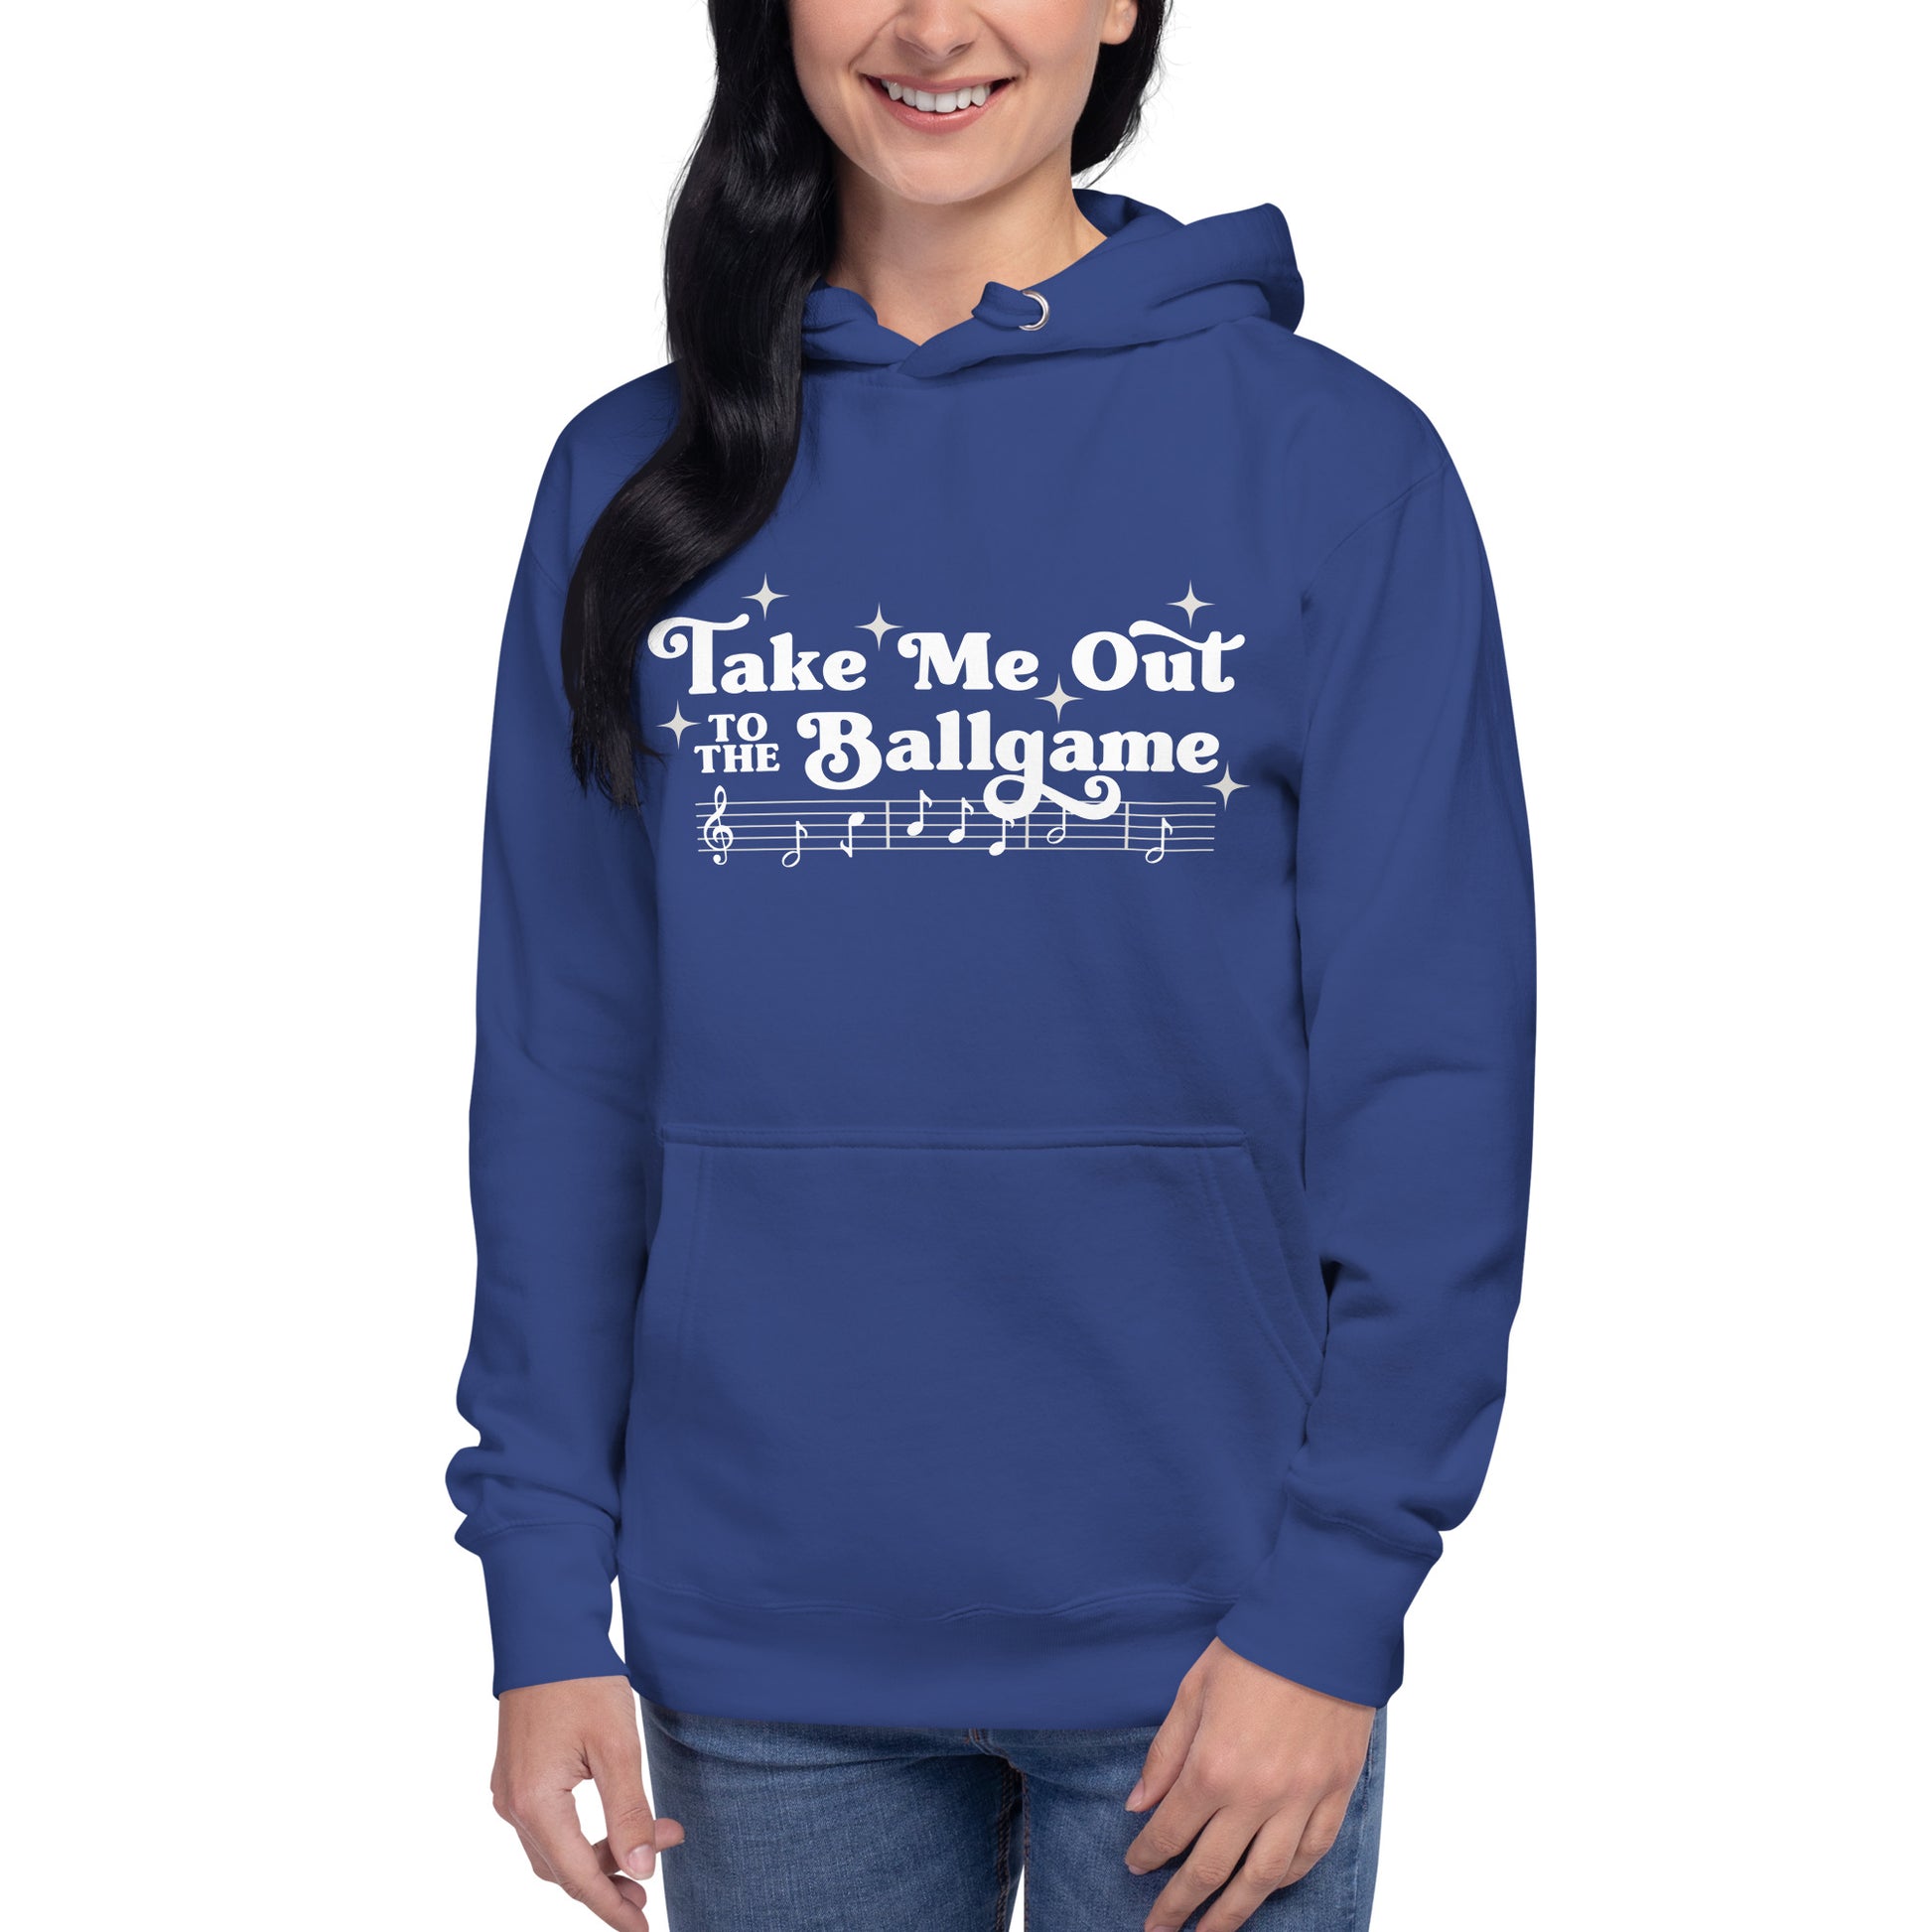 Image of woman wearing royal blue hoodie with design of "Take Me Out to the Ballgame" with coordinating musical notes in white located on centre chest. This design is exclusive to Tailgate Mercantile and available only online.